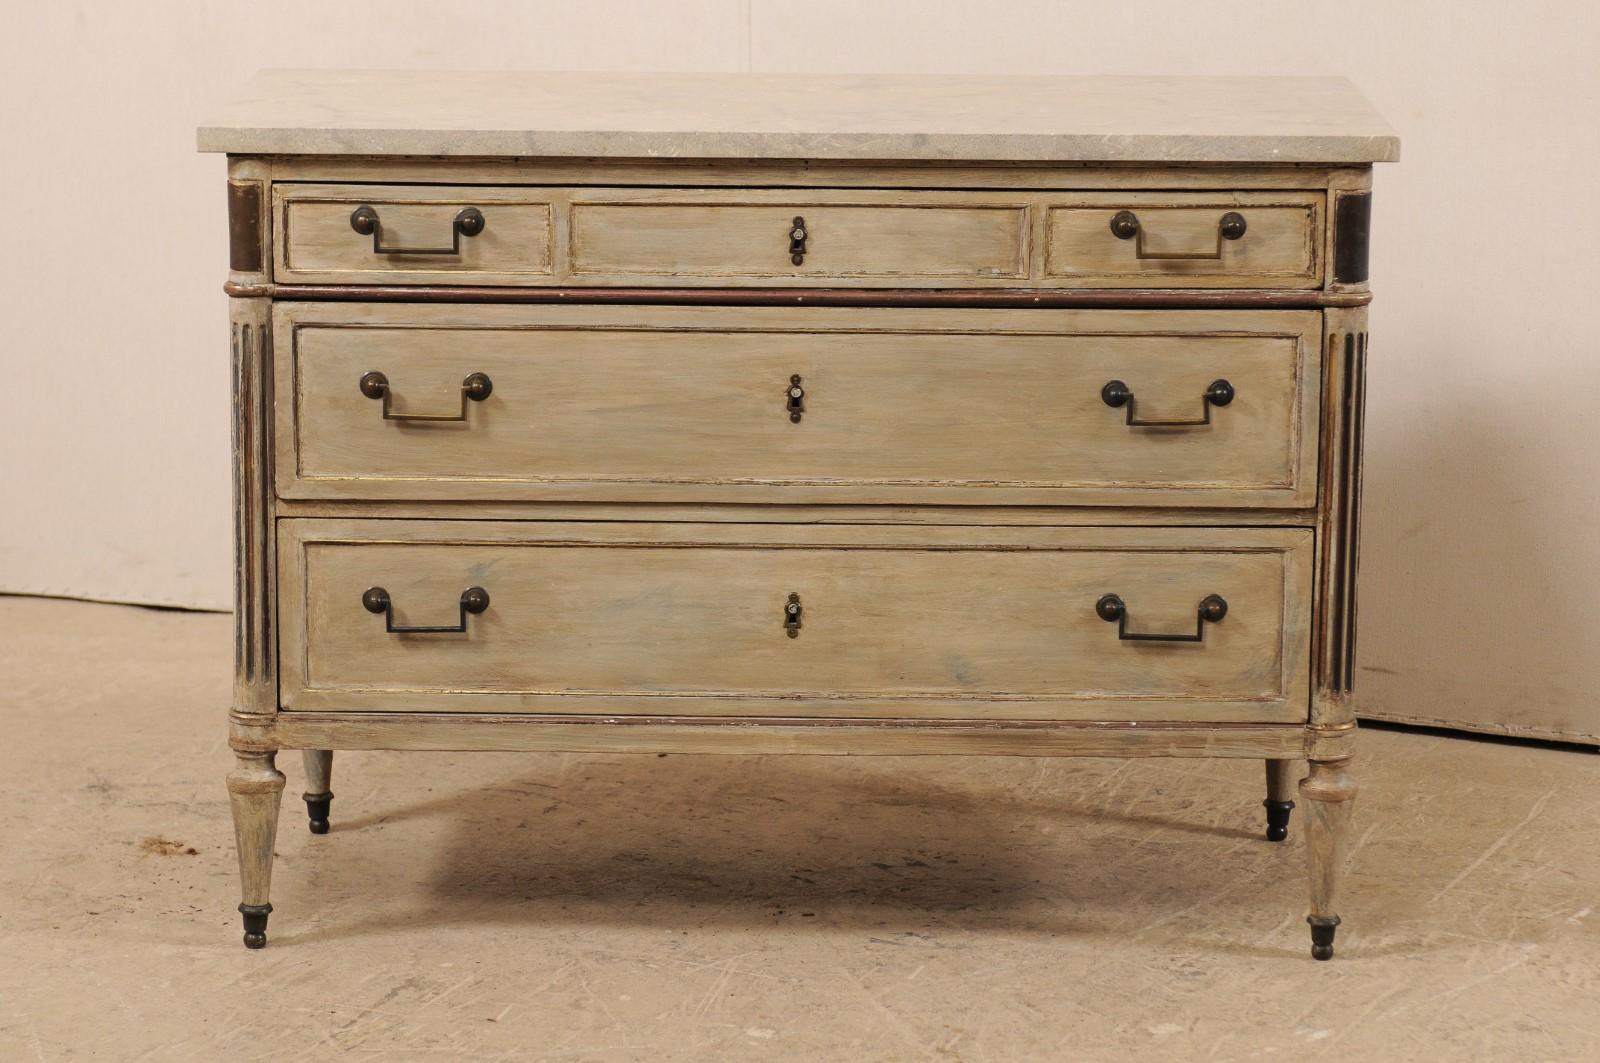 Carved Early 19th C. French Neoclassical Commode with Fossilized Limestone Top